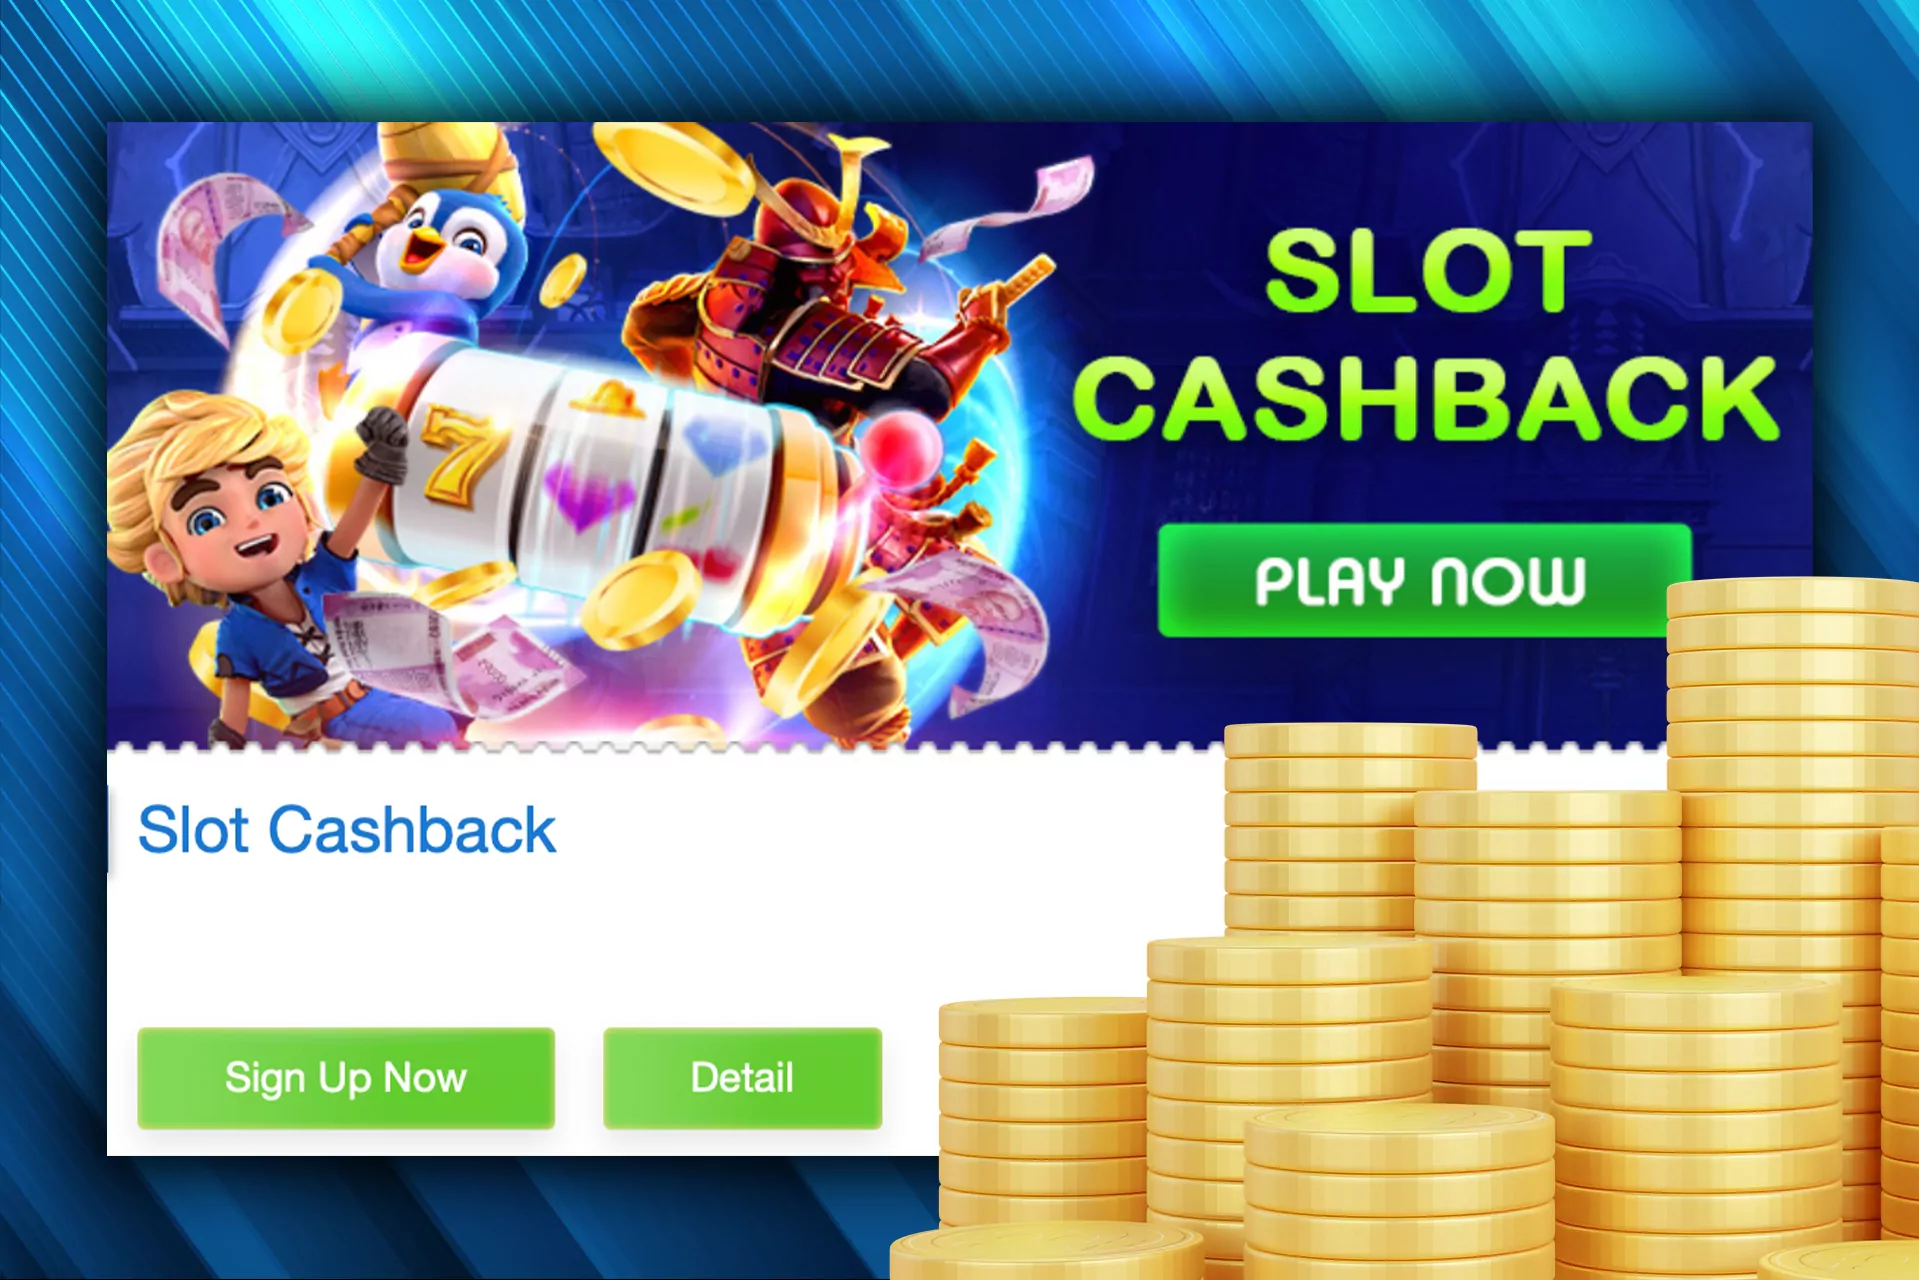 Get a cashback for playing in slots at Crickex.